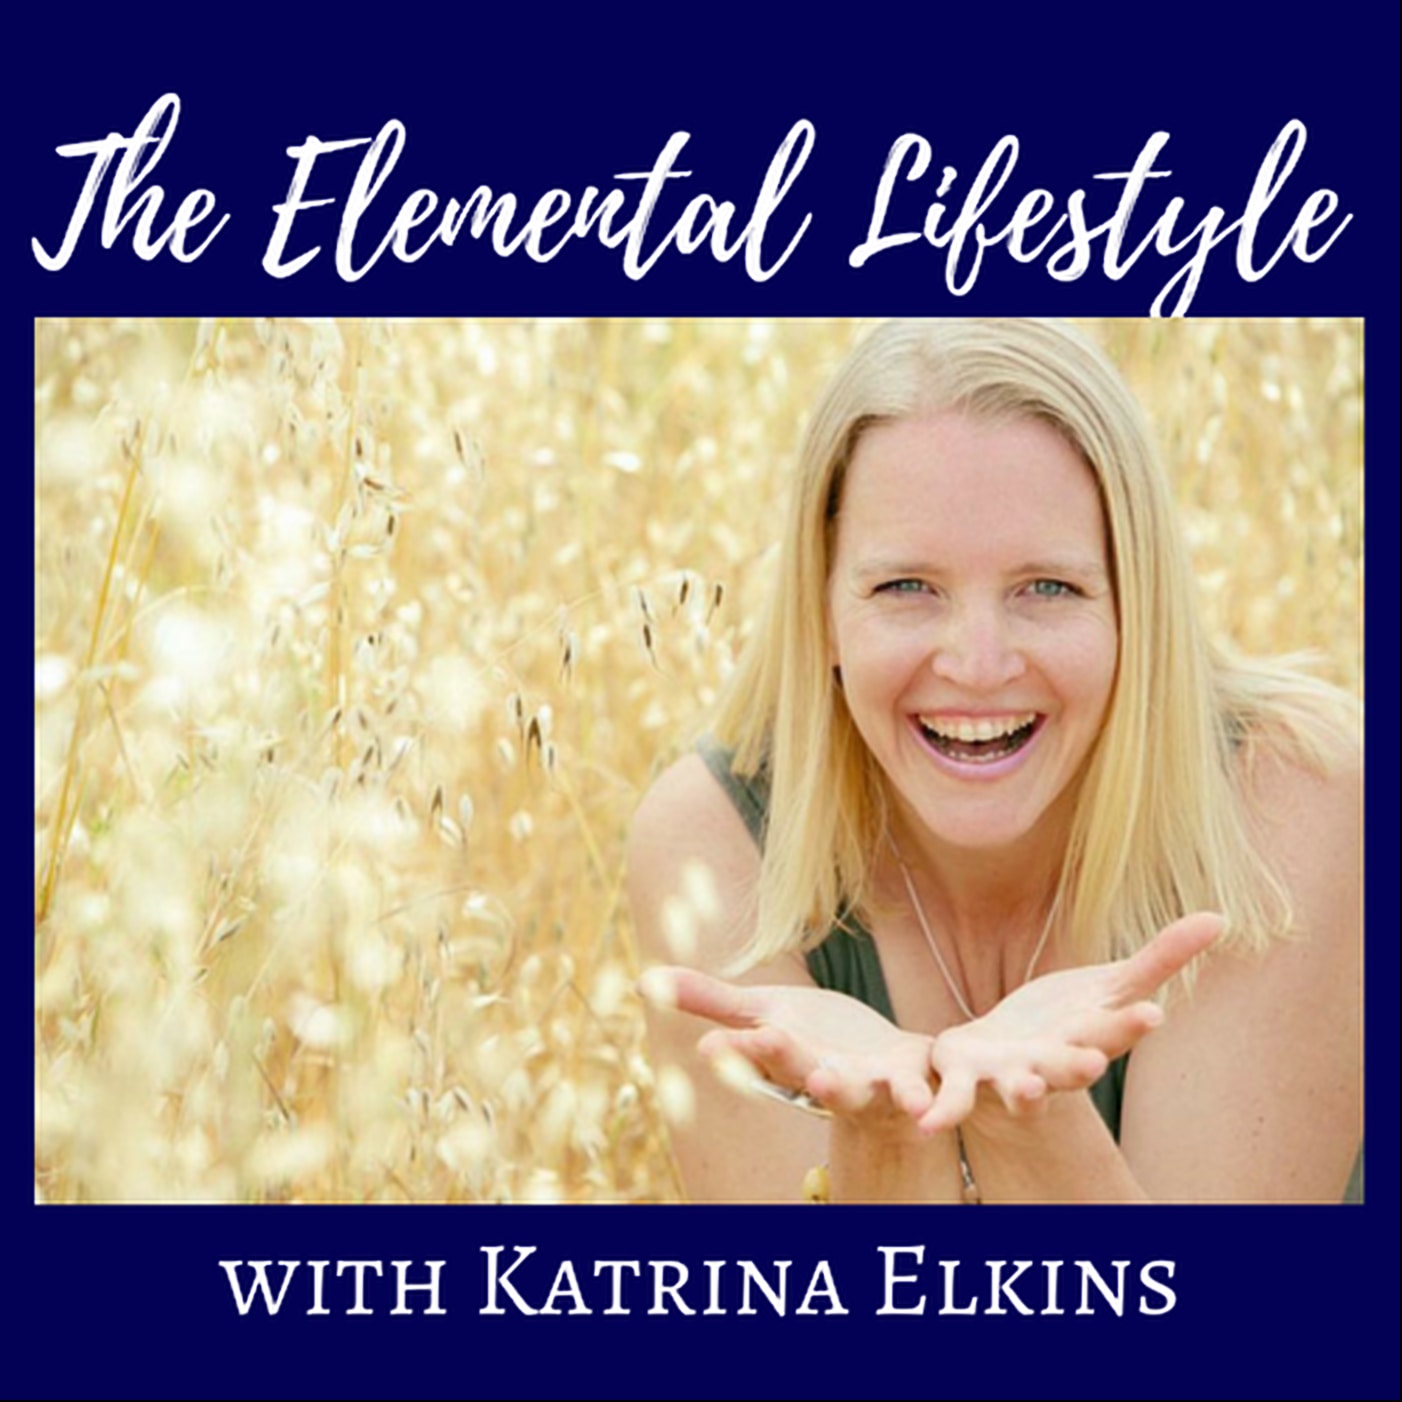 Katrina Elkins ”The Elemental Lifestyle is now a Podcast” on The Erica Glessing Show Podcast #2123